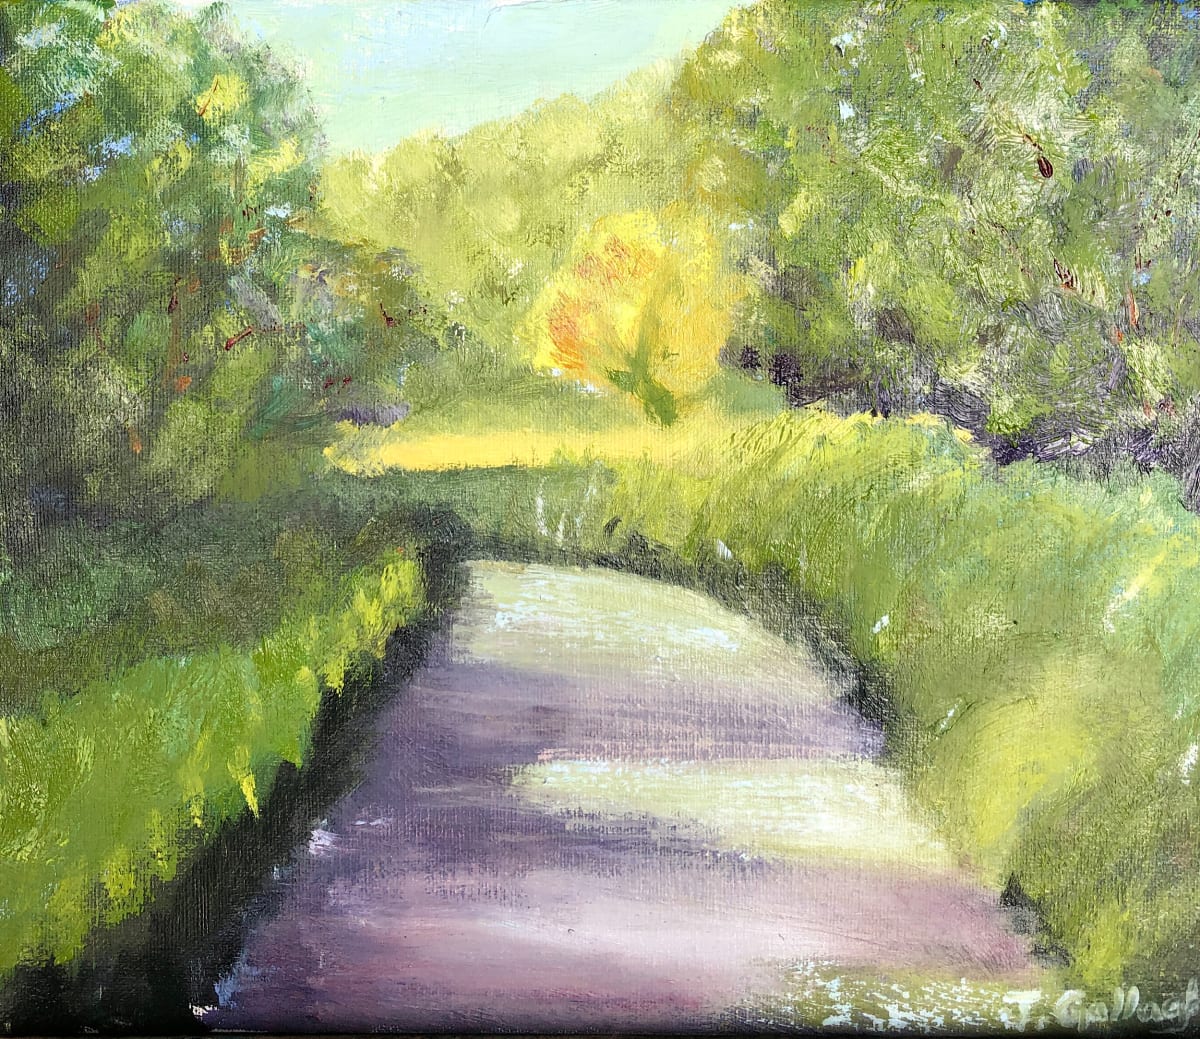 Sunny Road by Janet Gallagher  Image: This is a painting from a photograph showing a quiet road surrounded by trees, leading to an open field. 